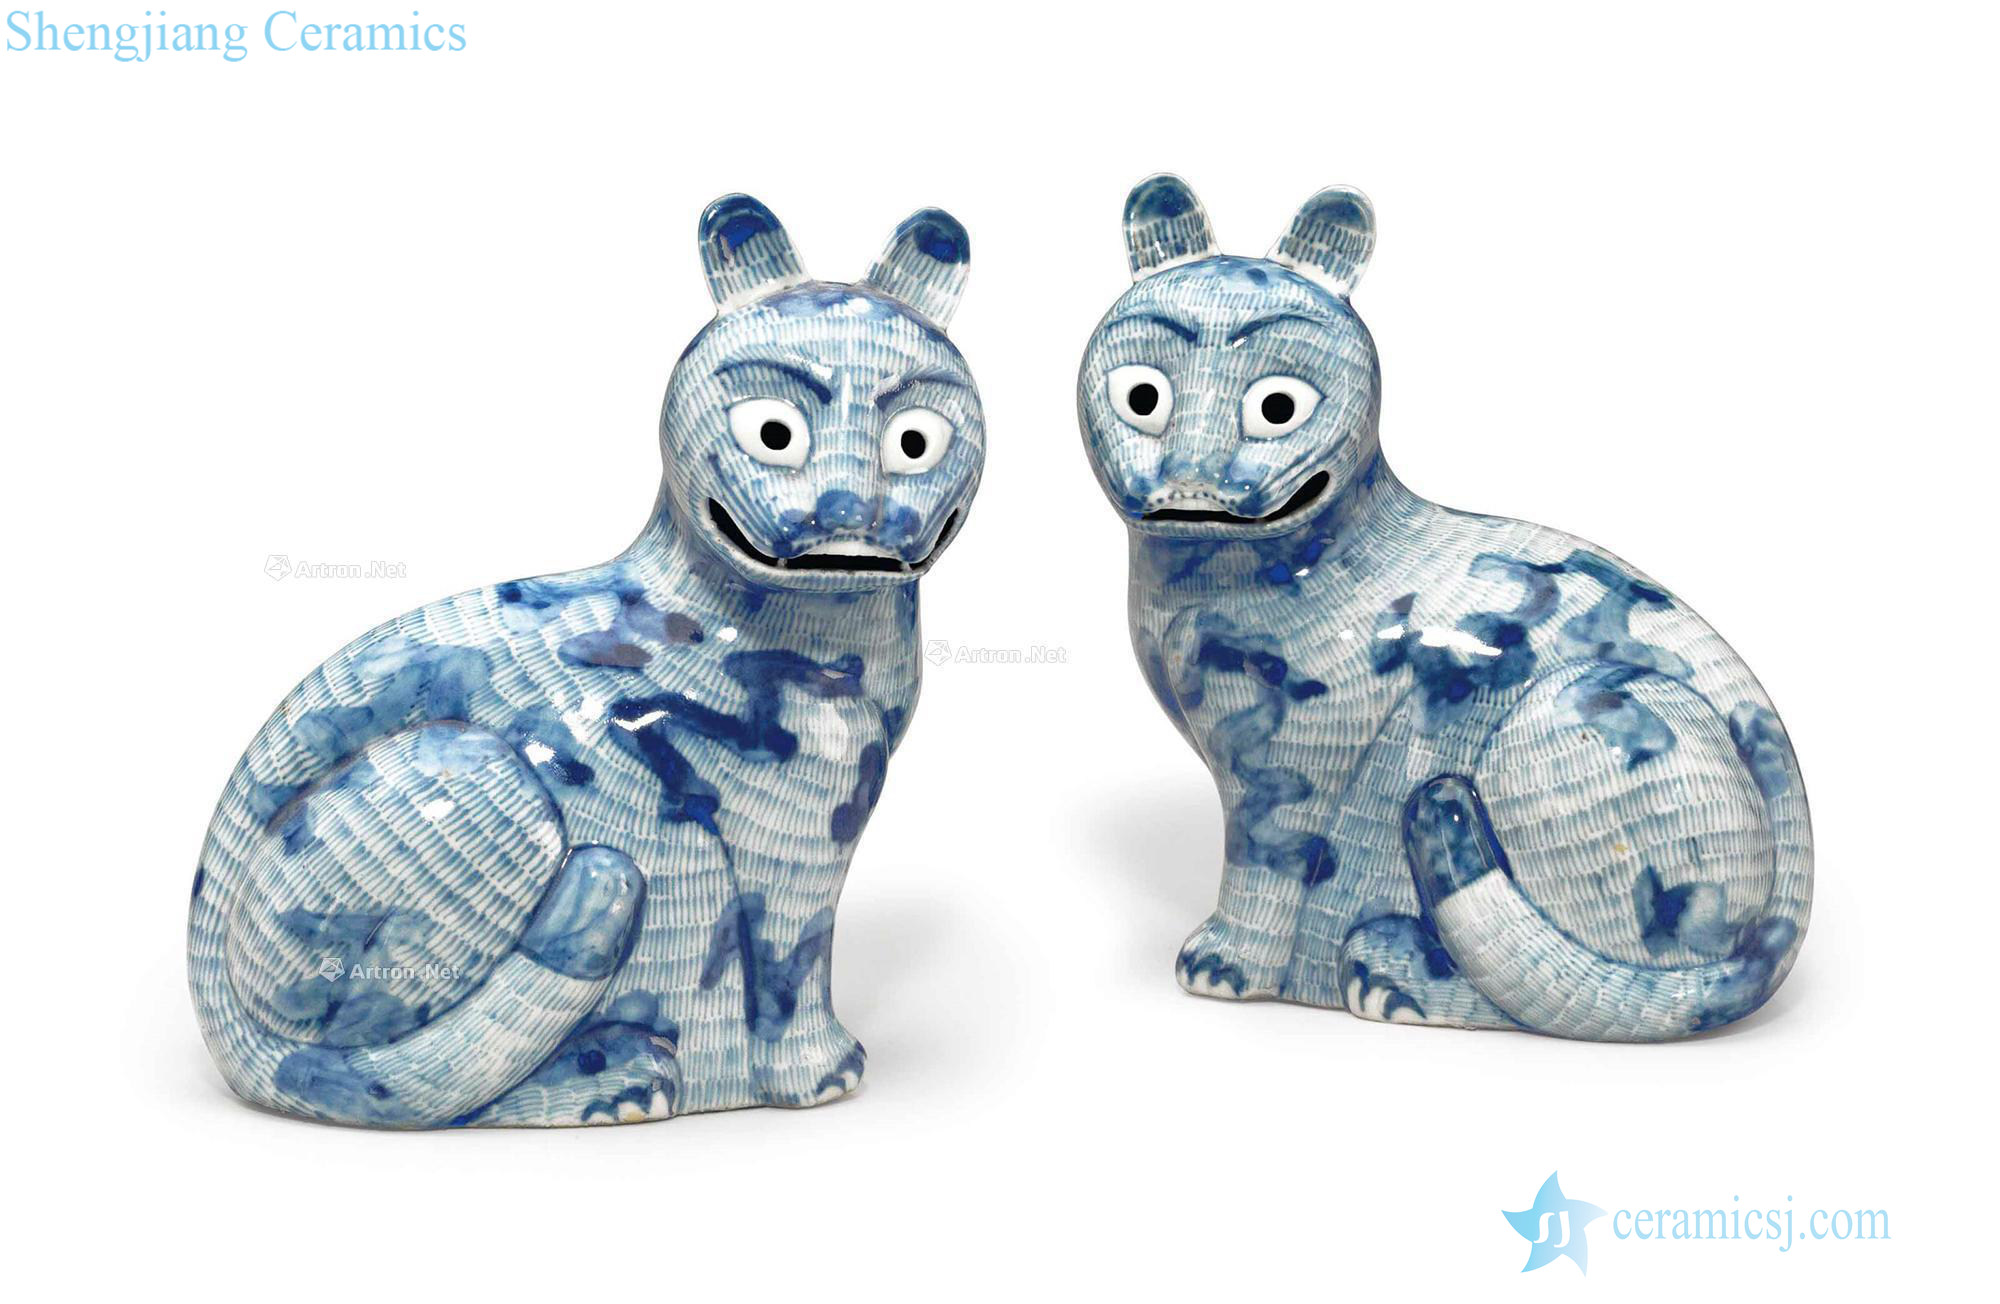 Kangxi period, 1662-1722 - A PAIR OF BLUE AND WHITE CAT NIGHT towns